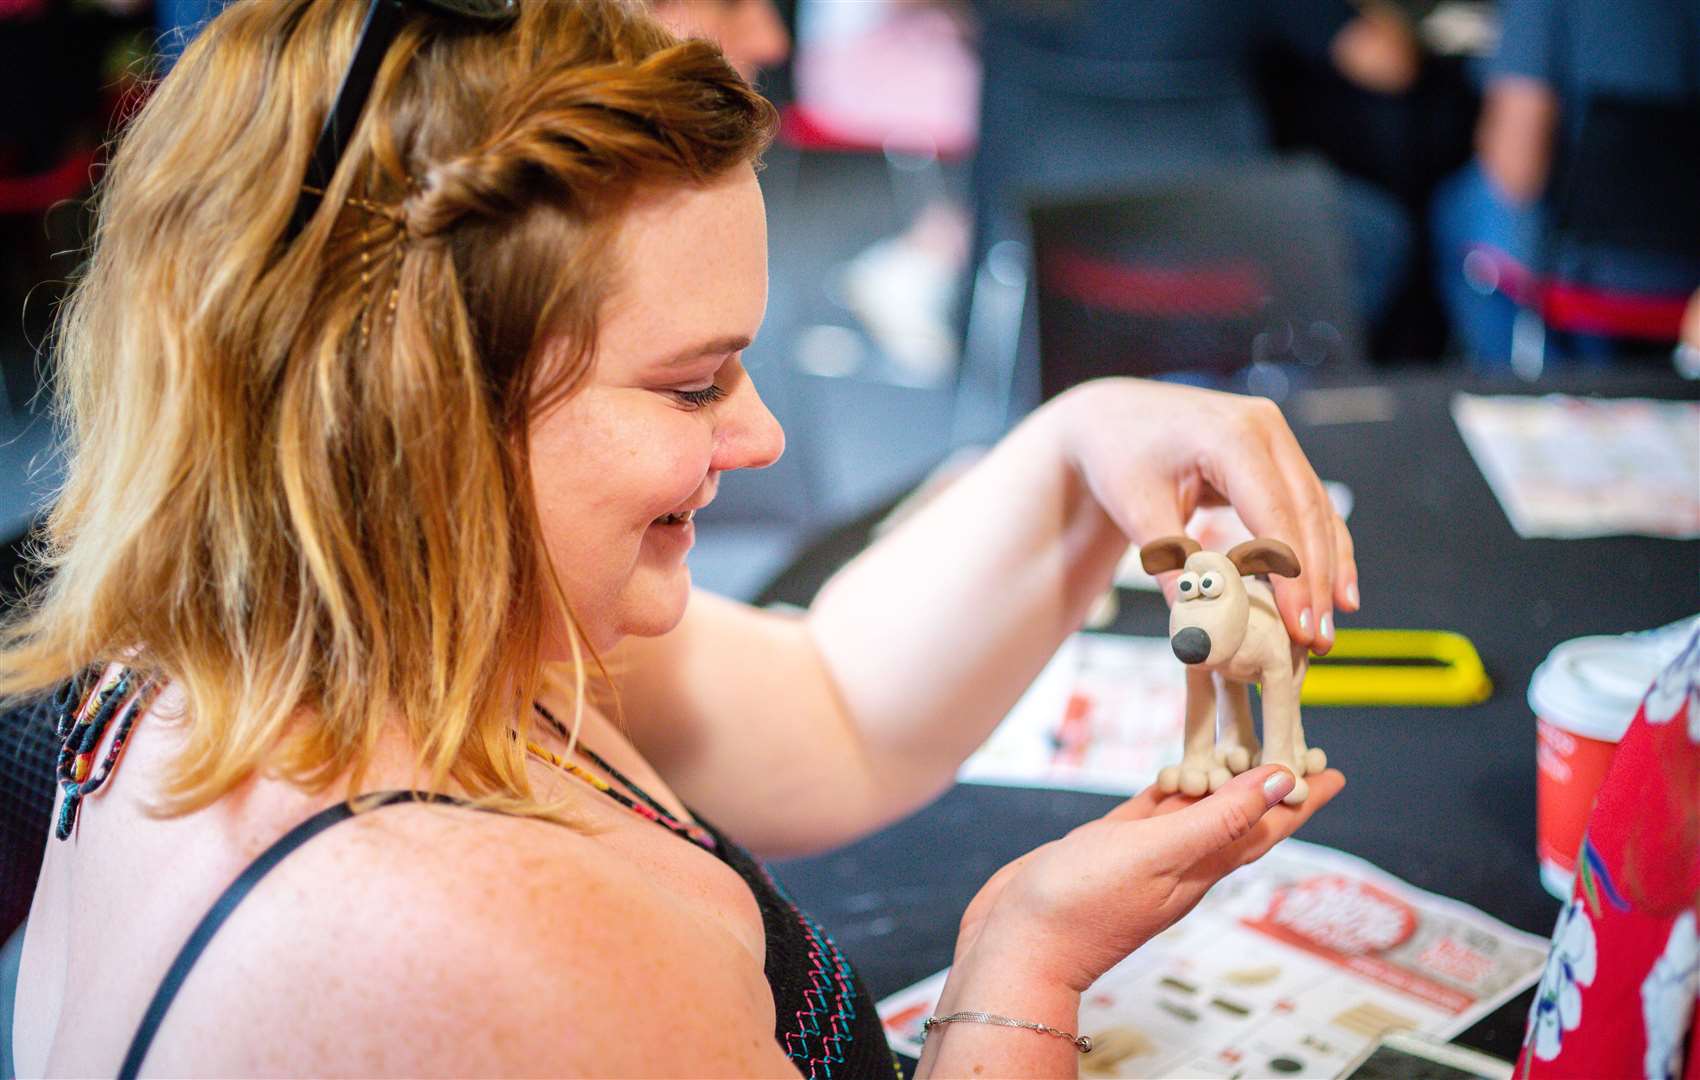 Take home a clay model from the workshops at Dreamland this February half term